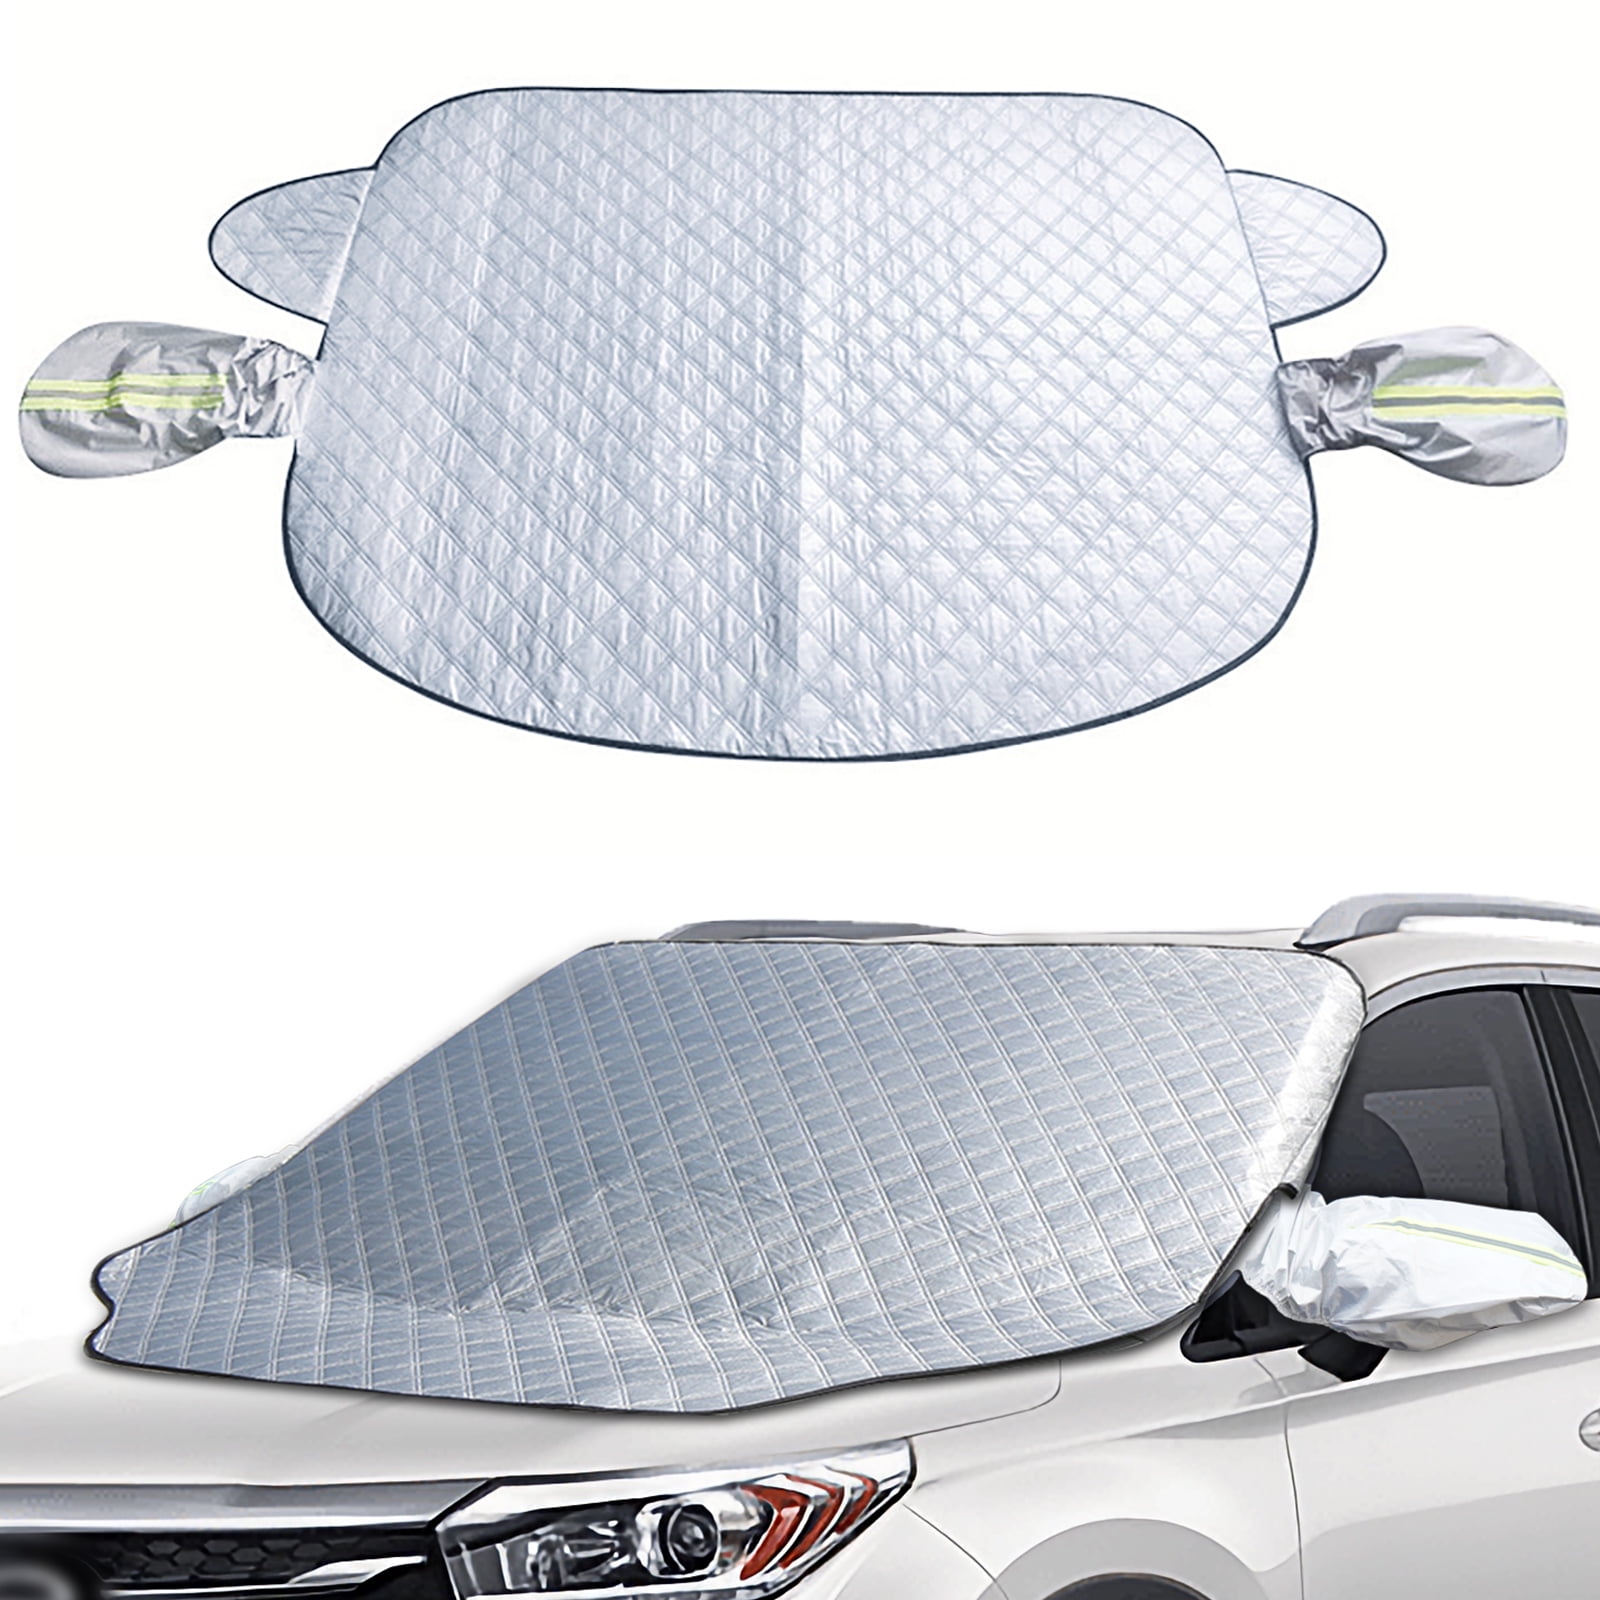 Weathershield Windshield Wrap - Car Snow Cover - All Weather Magnetic Wrap  - (Silver)